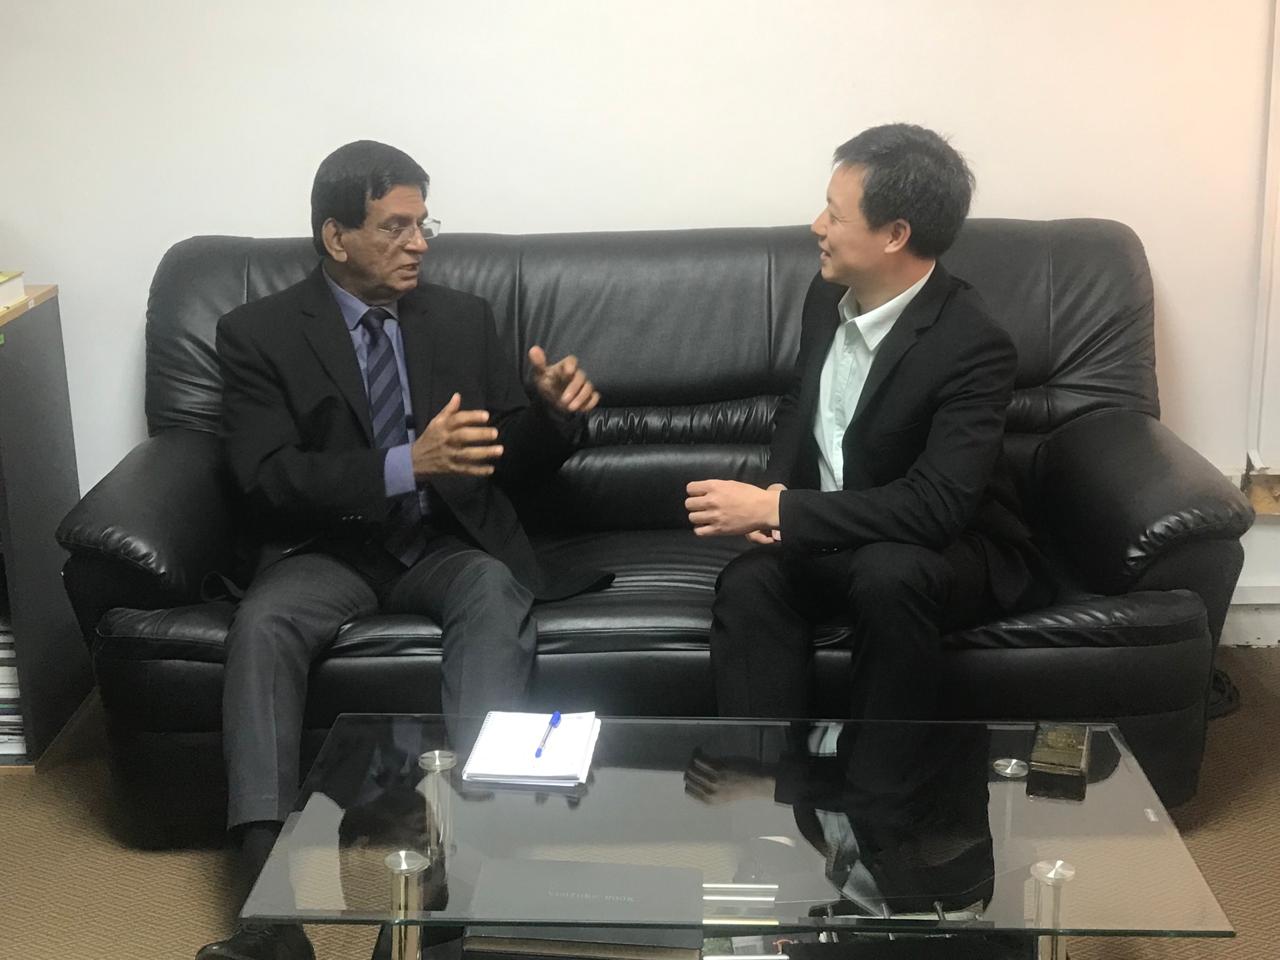 Dr. Jinglong Yao, Deputy Director, China - Sri Lanka Joint Center for Education & Research visits the National Science Foundation